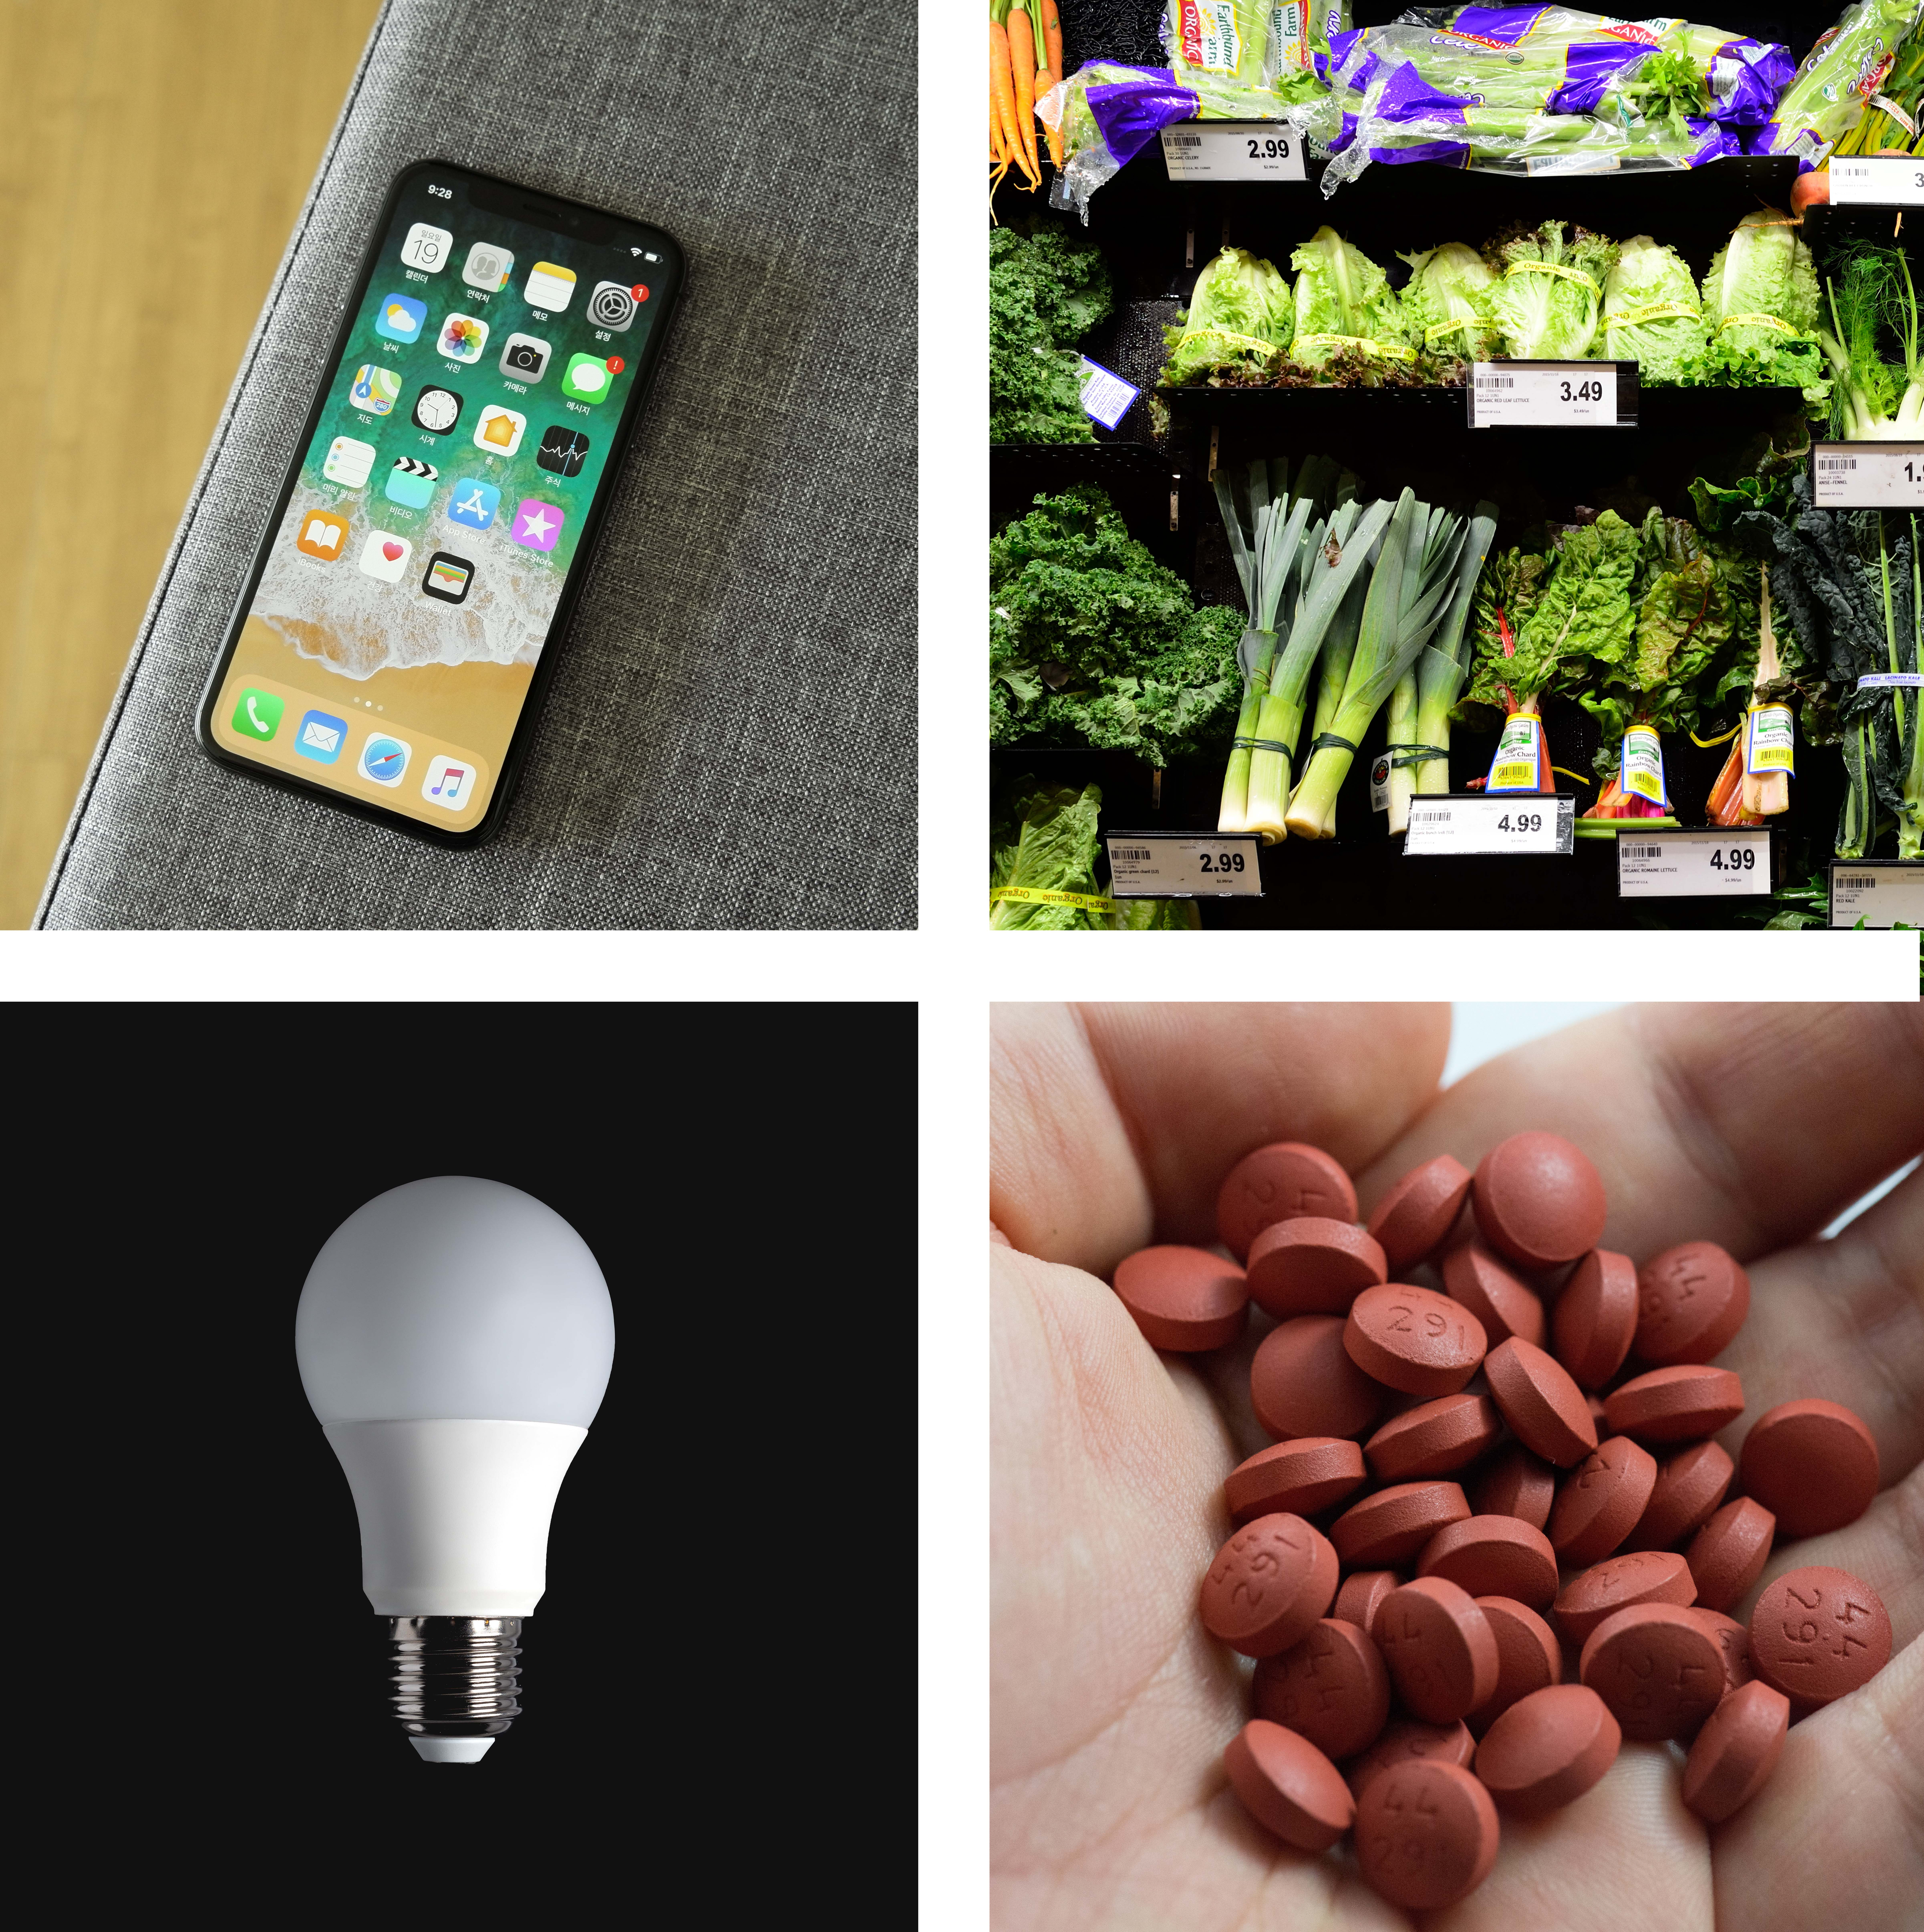 Four photos: top left is a smart phone, top right is produce at a grocery store, bottom left is a lightbulb, bottom right is a handful of ibuprofen pills.